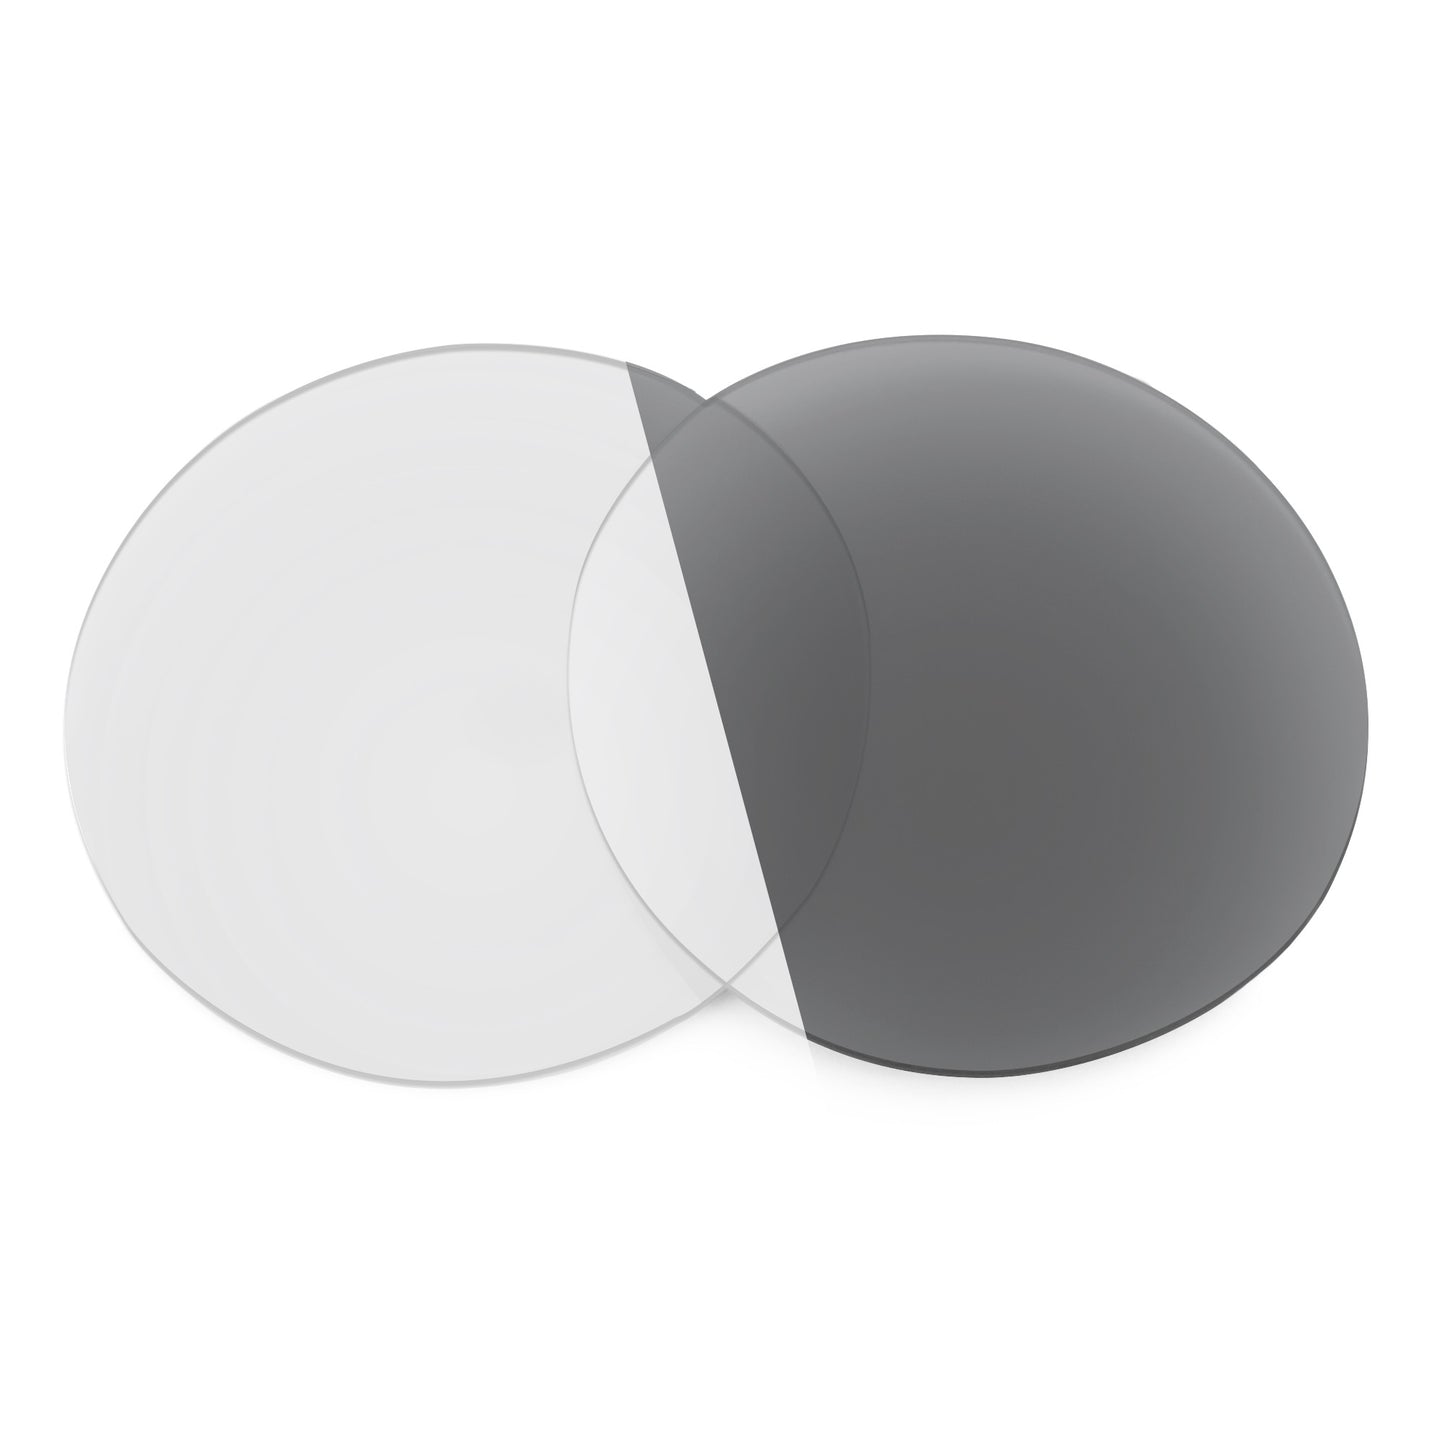 Revant replacement lenses for Ray-Ban Erika RB4171 54mm Non-Polarized Adapt Gray Photochromic